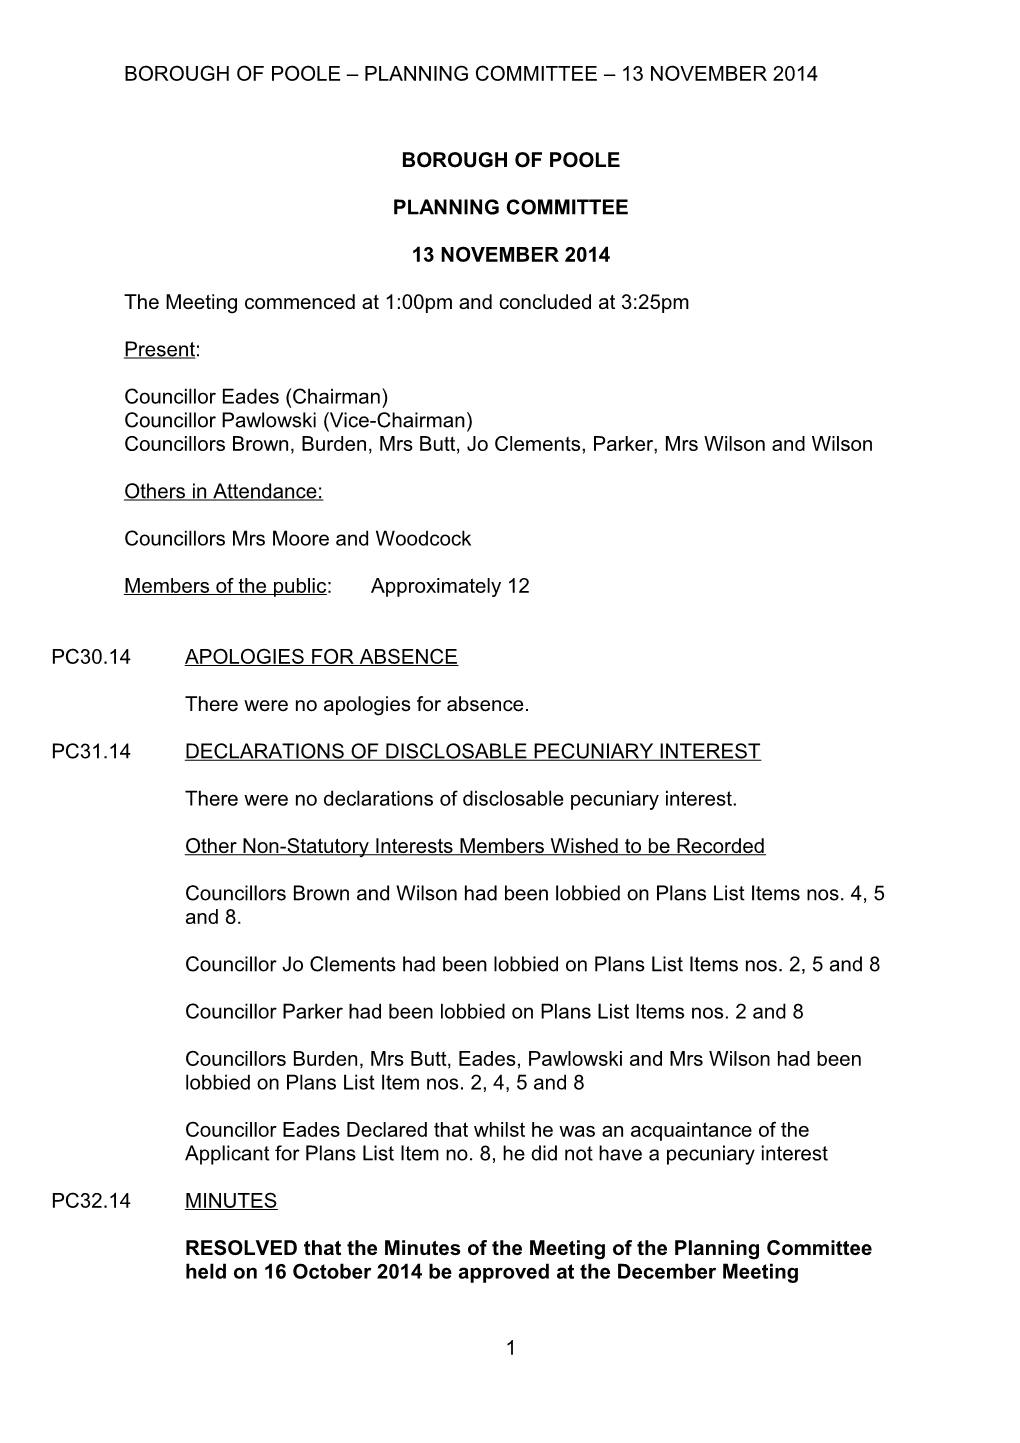 Borough of Poole Planning Committee 13 November 2014